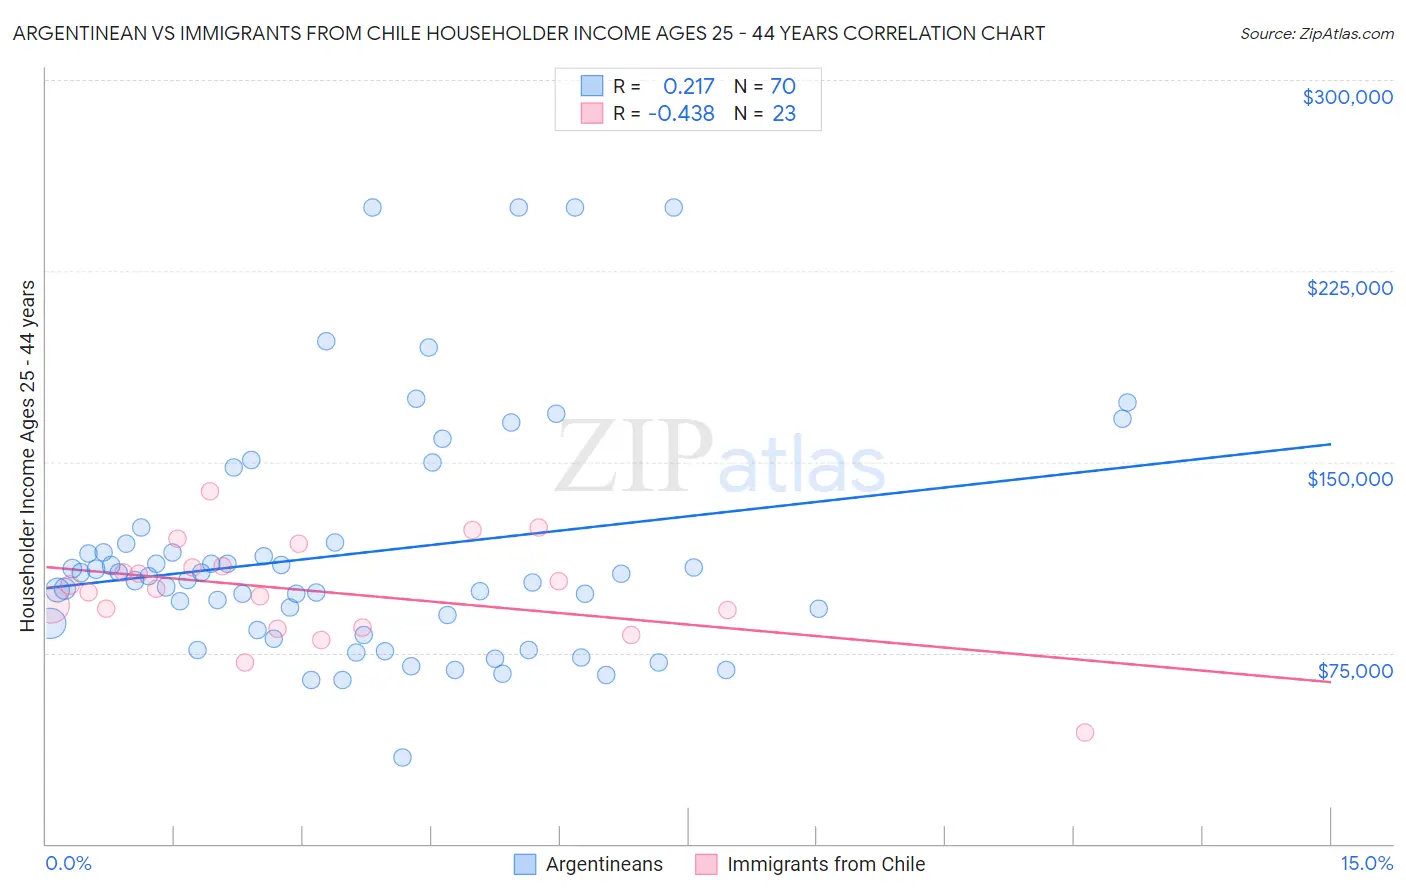 Argentinean vs Immigrants from Chile Householder Income Ages 25 - 44 years